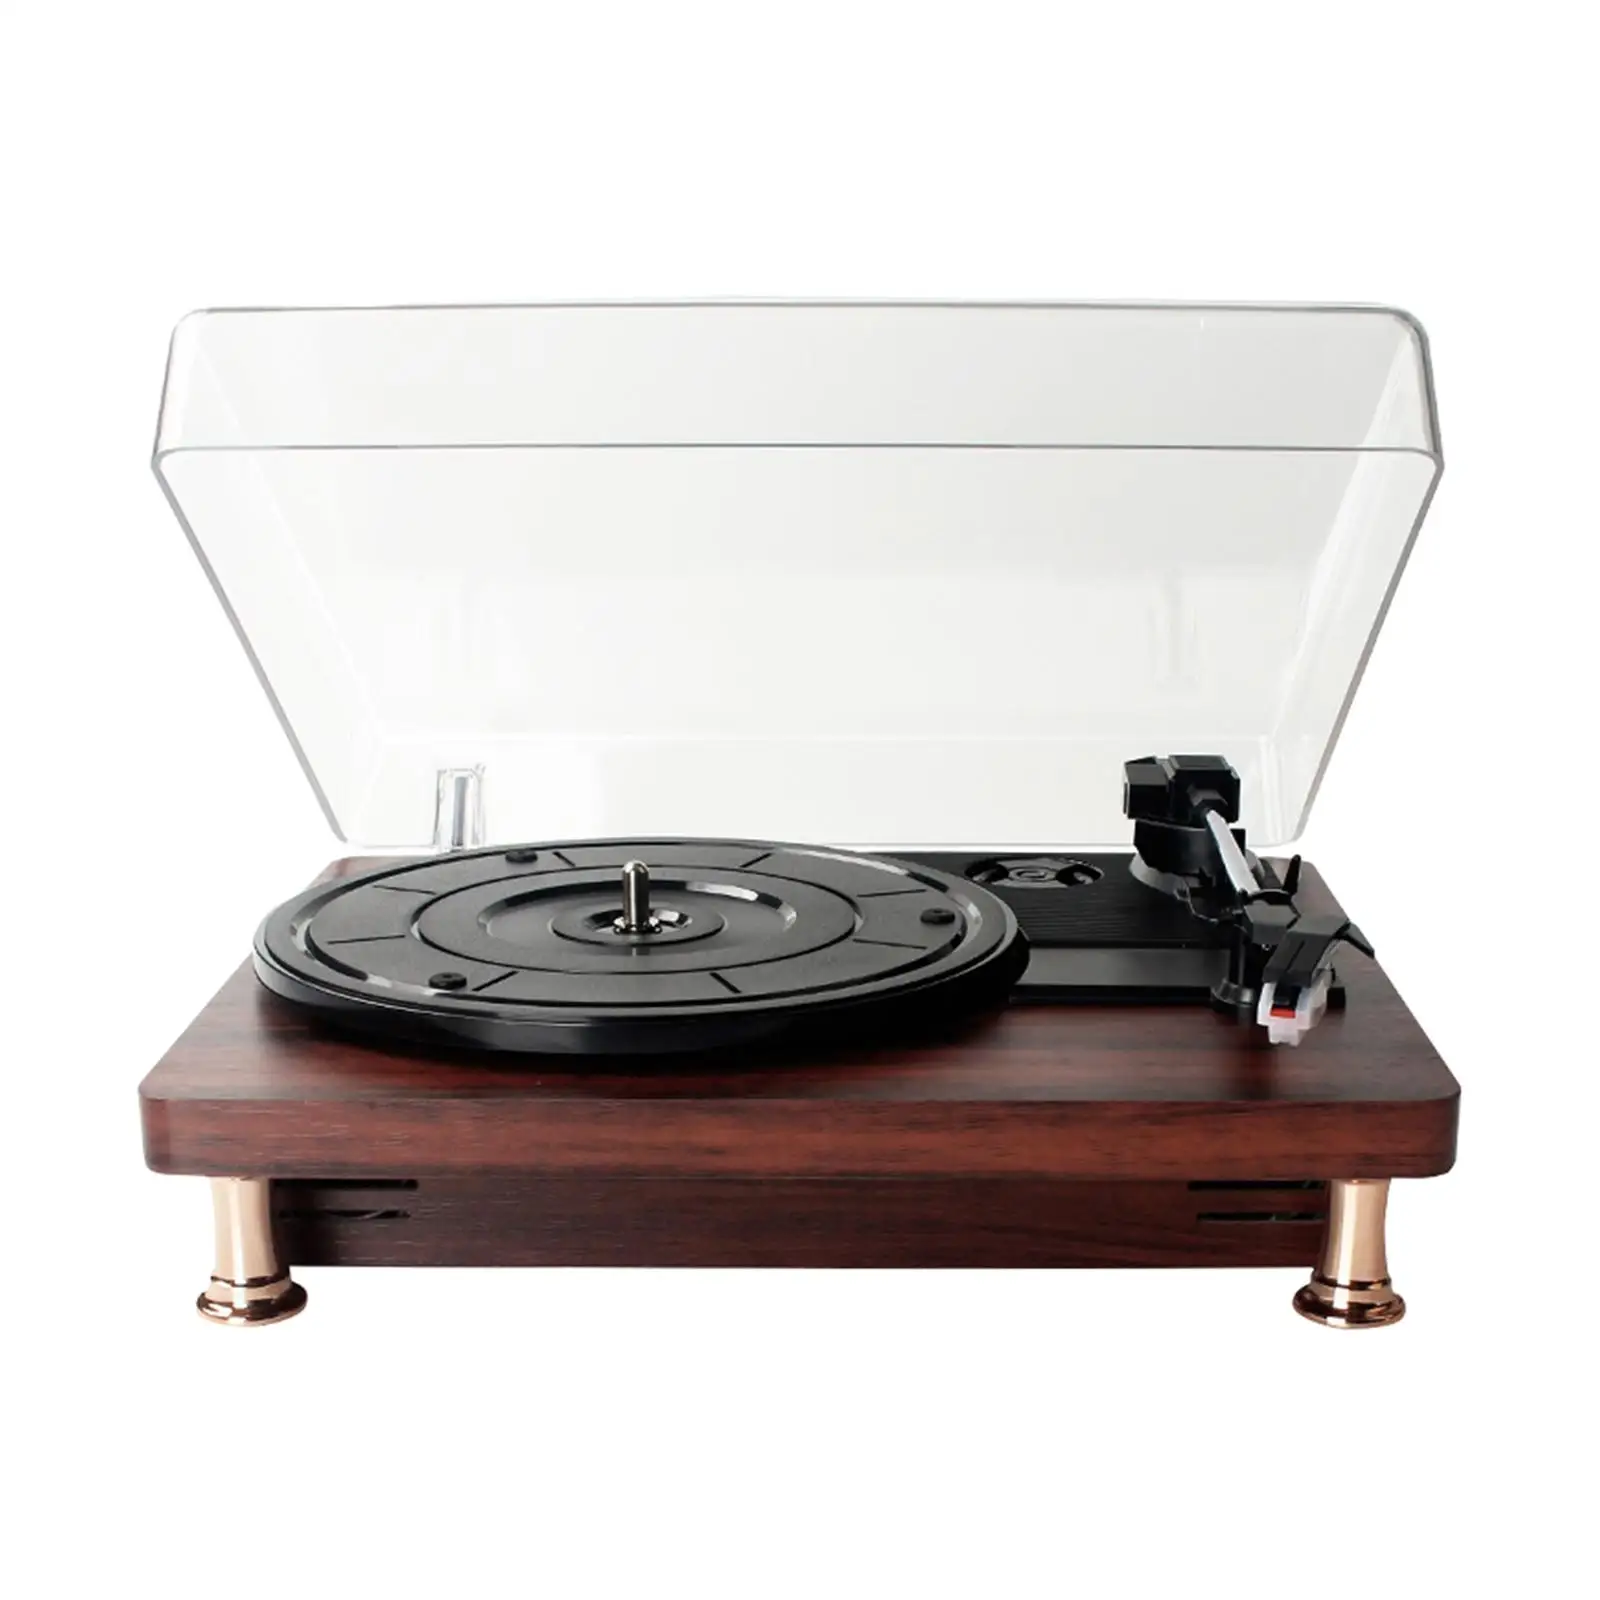 Vinyl Record Player Turntable Music Player Portable Turntable Player 33/45/78 RPM Built in Speakers for Club Home Bar Decoration